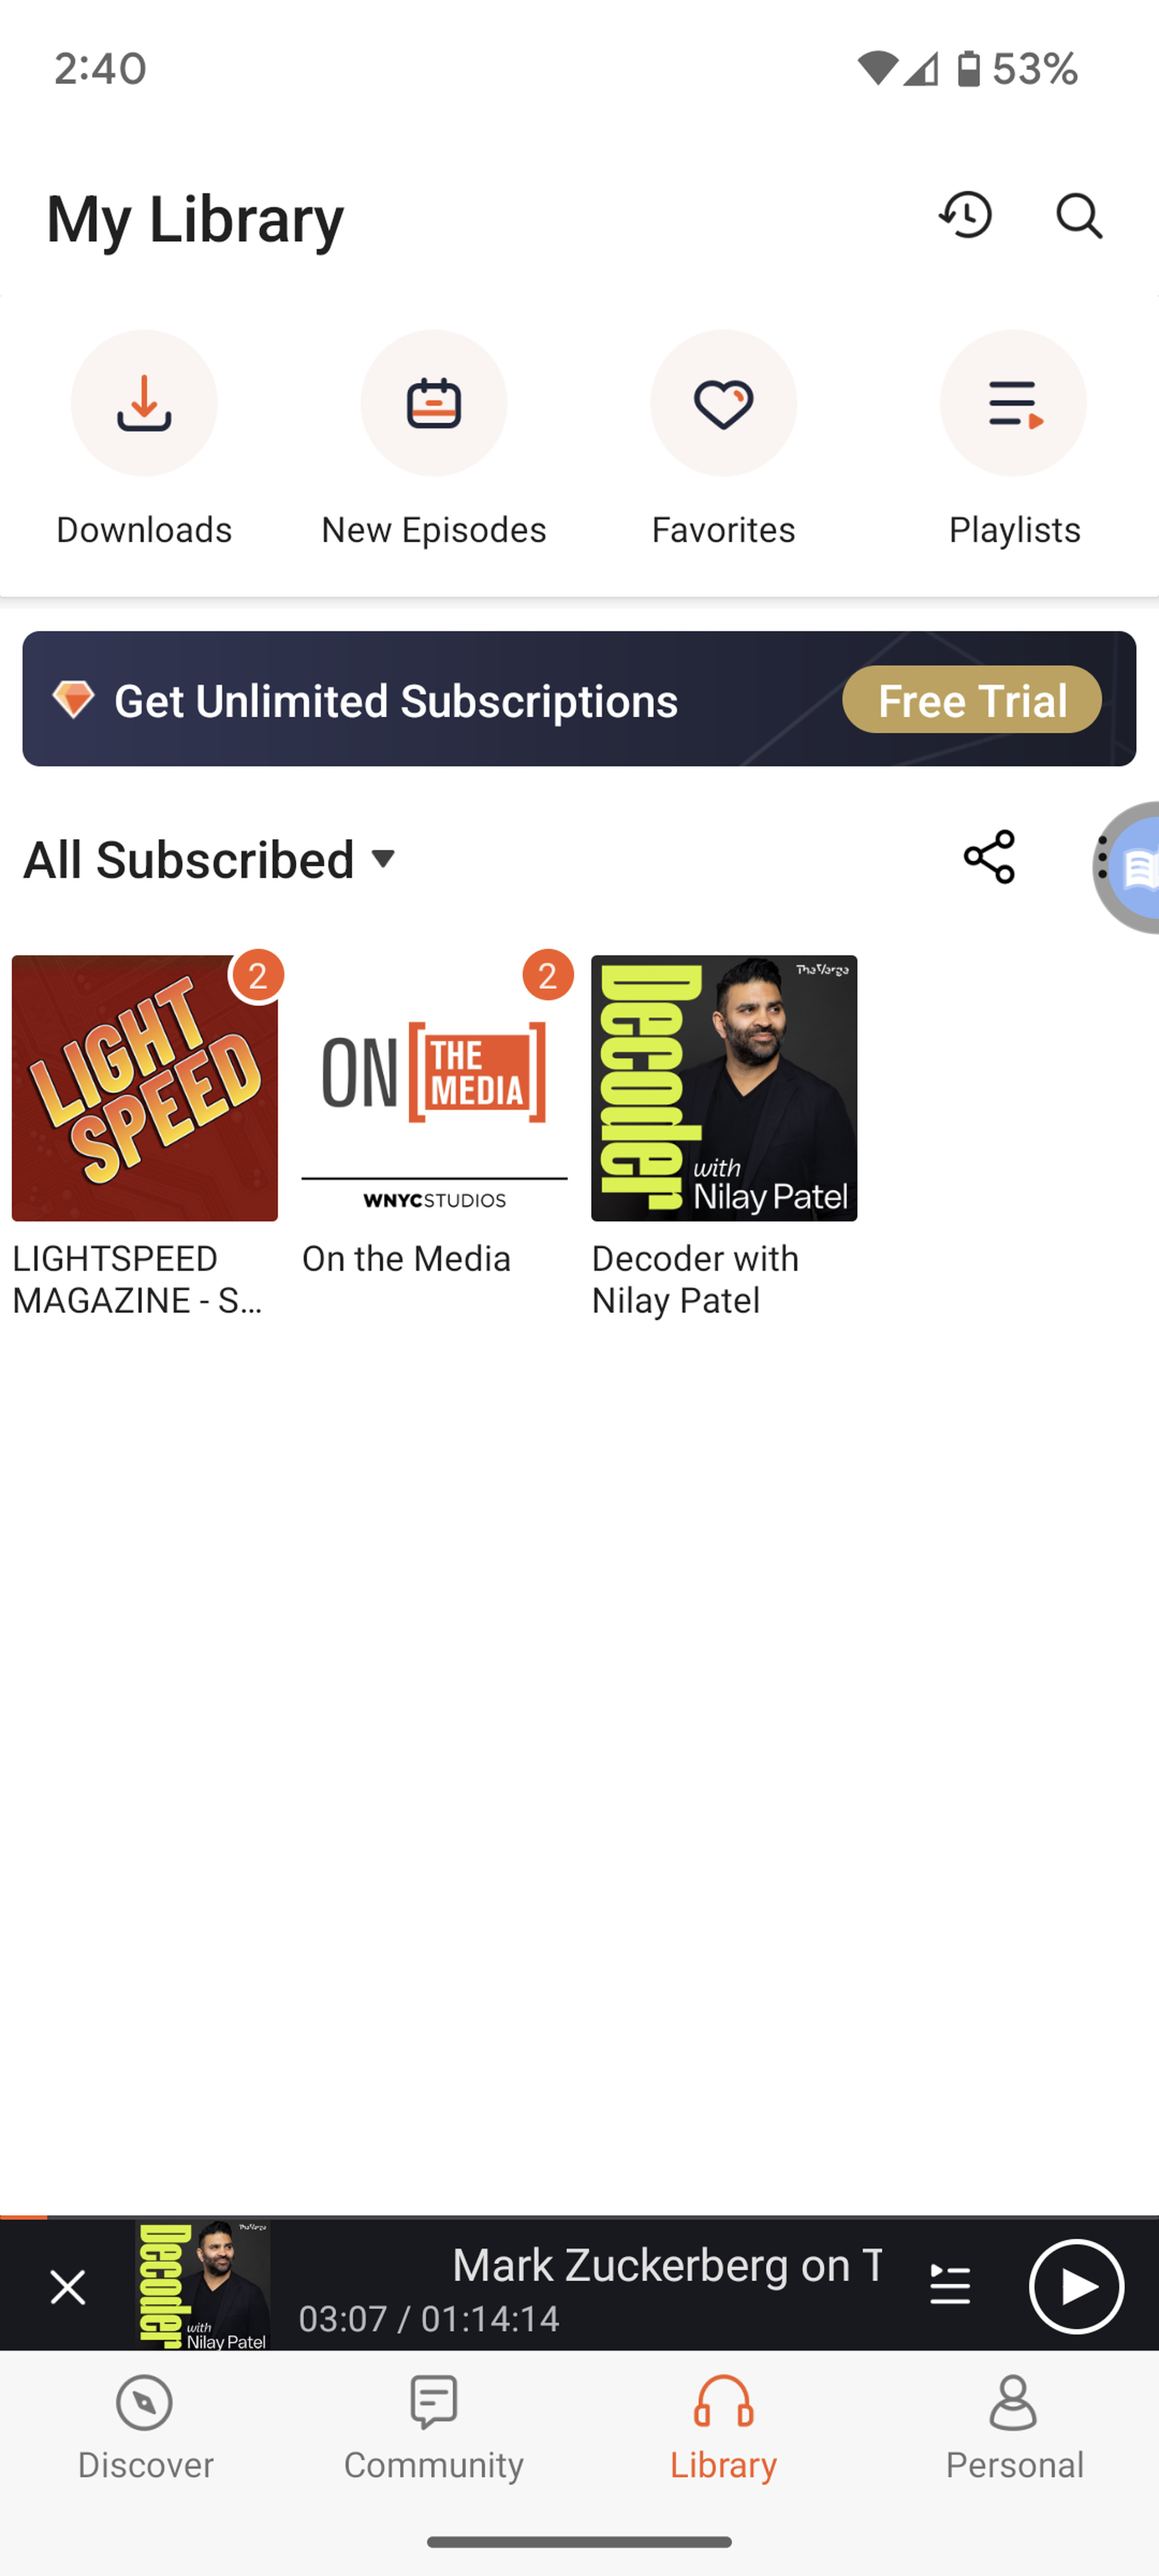 The My Library page  with three podcast covers and four icons at bottom.